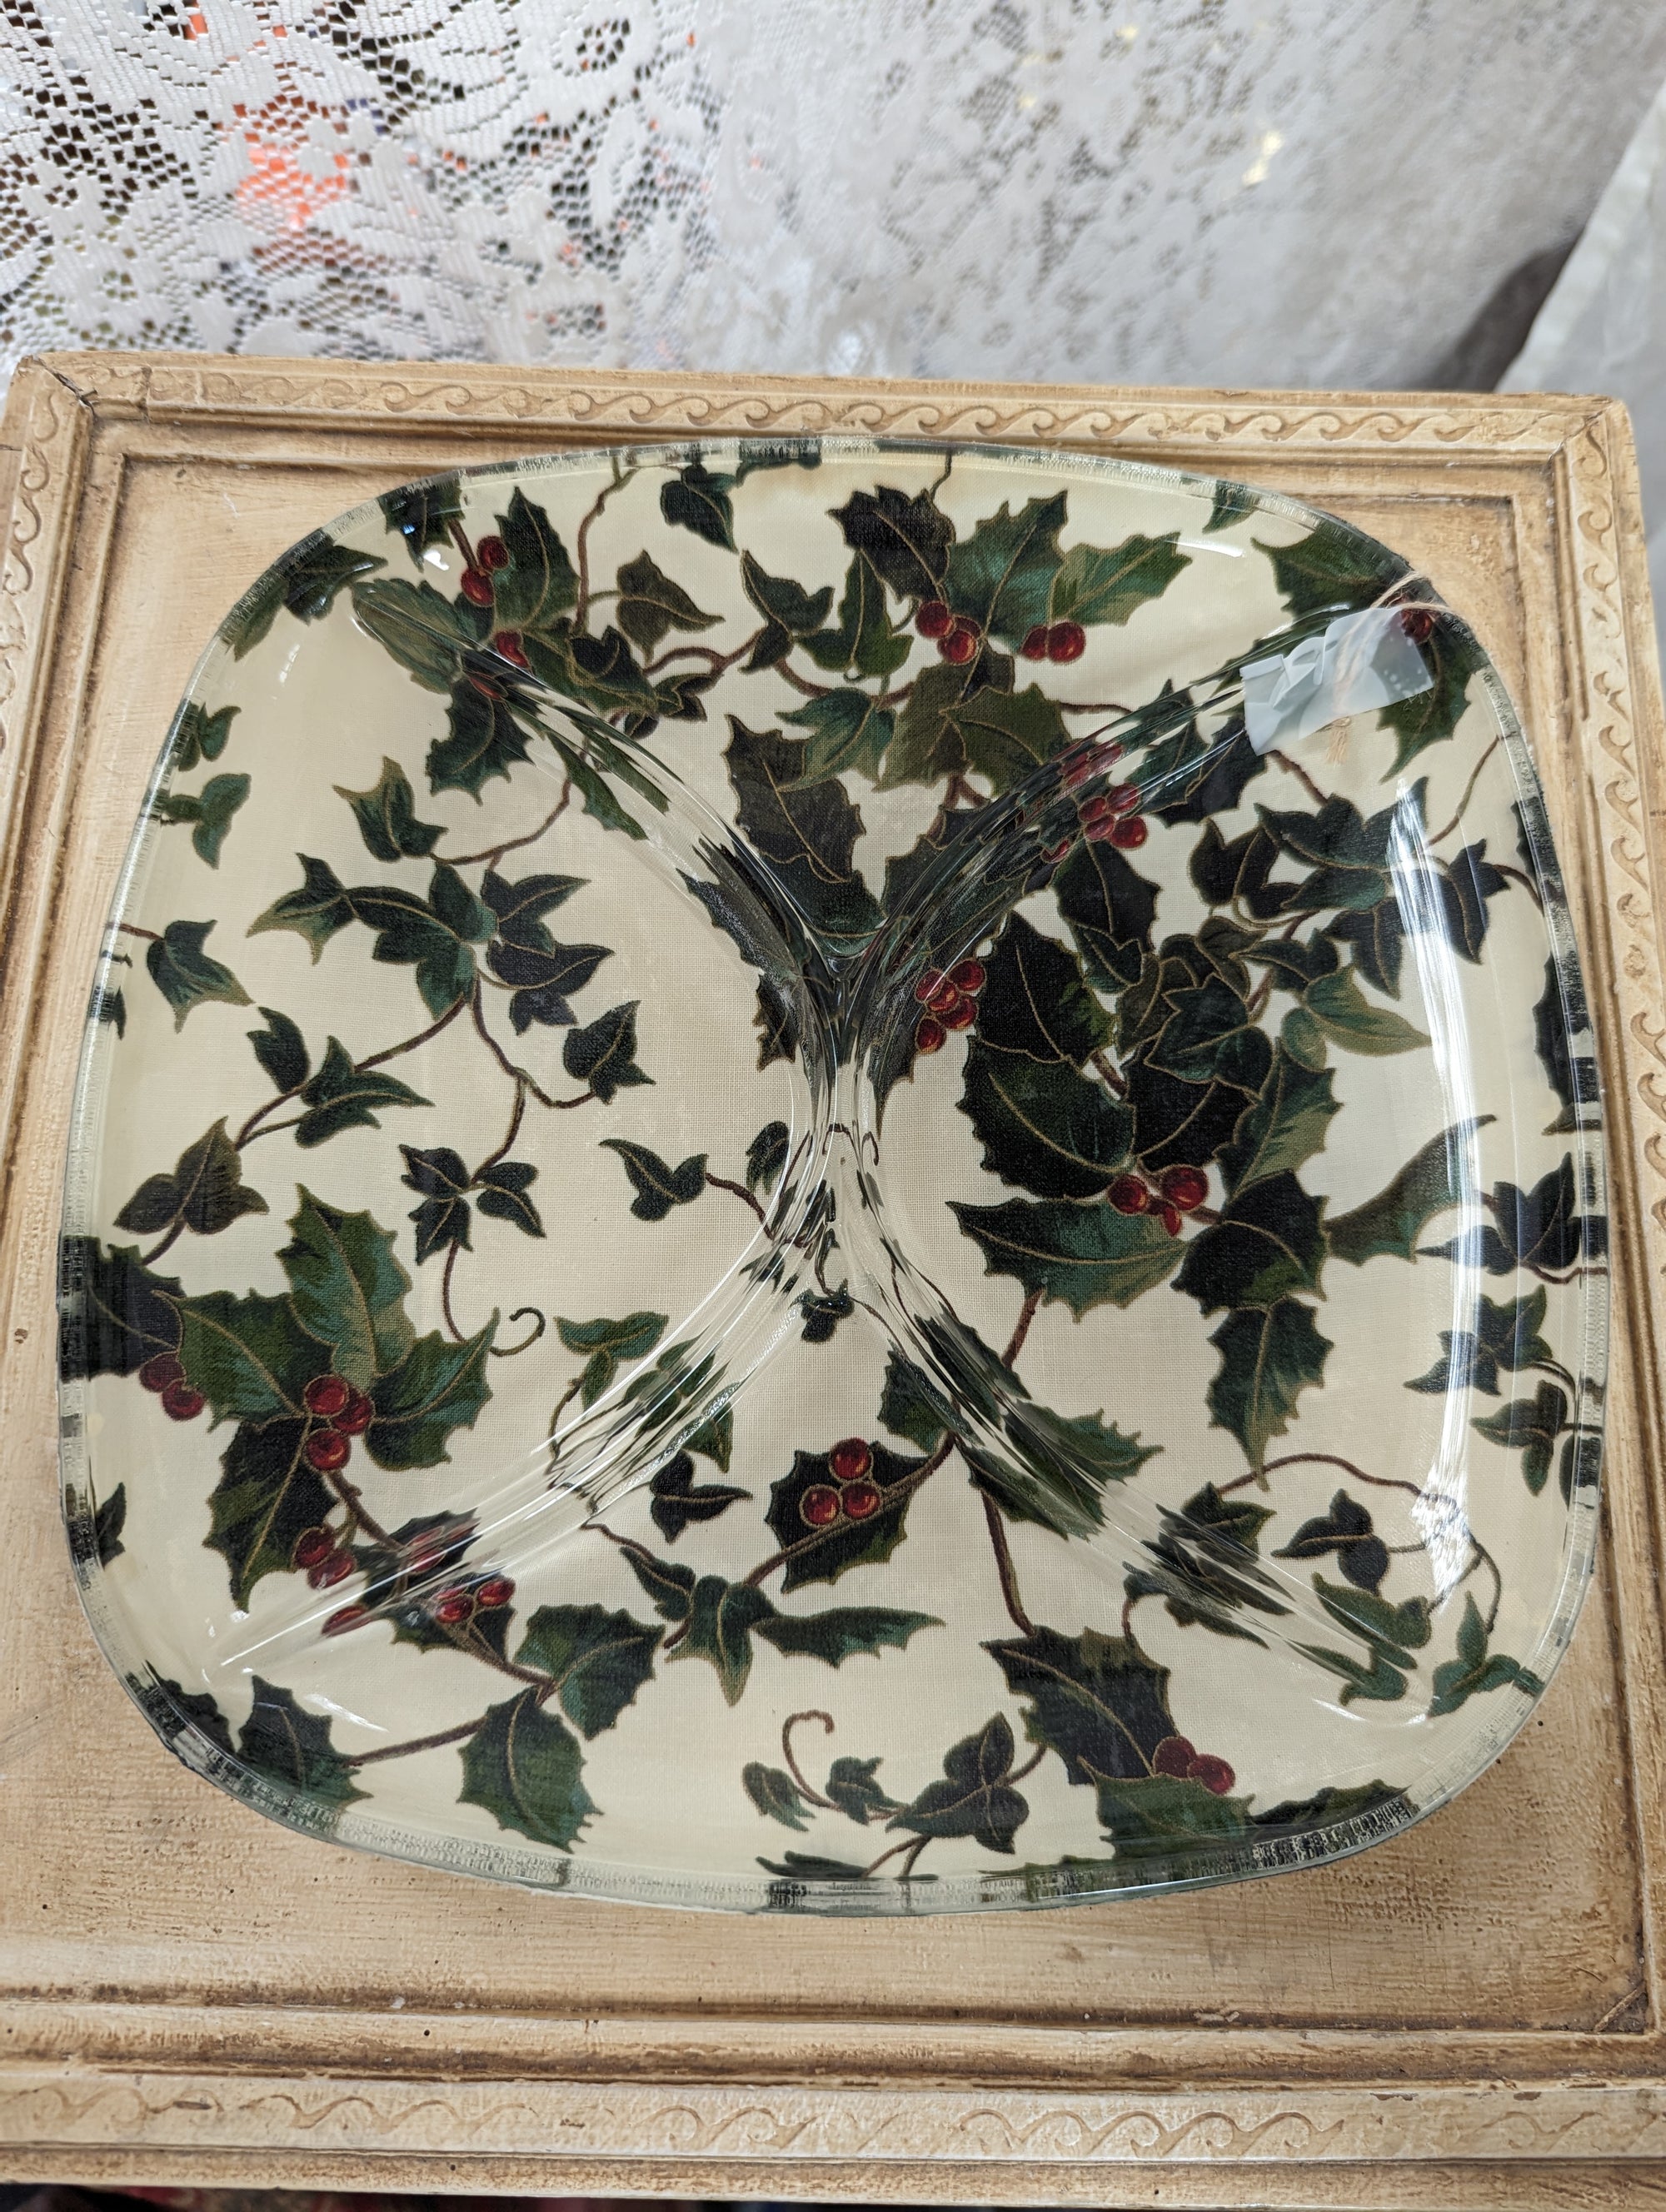 Holly & Berries Divided Plate